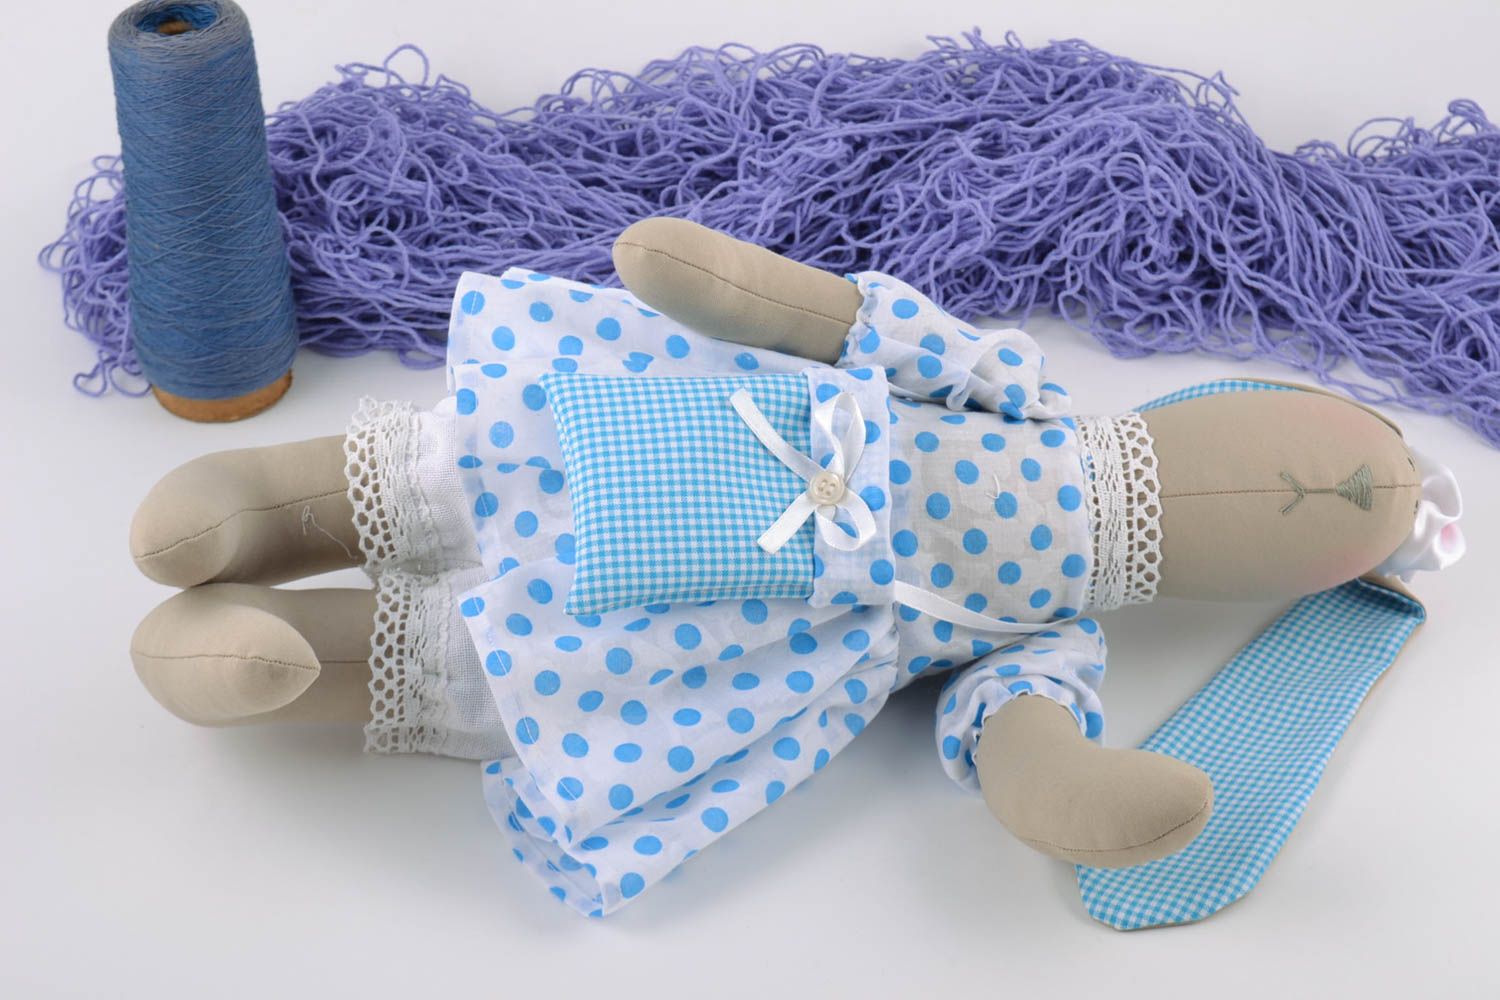 Handmade linen fabric soft toy rabbit in blue polka dot dress with small bag photo 1